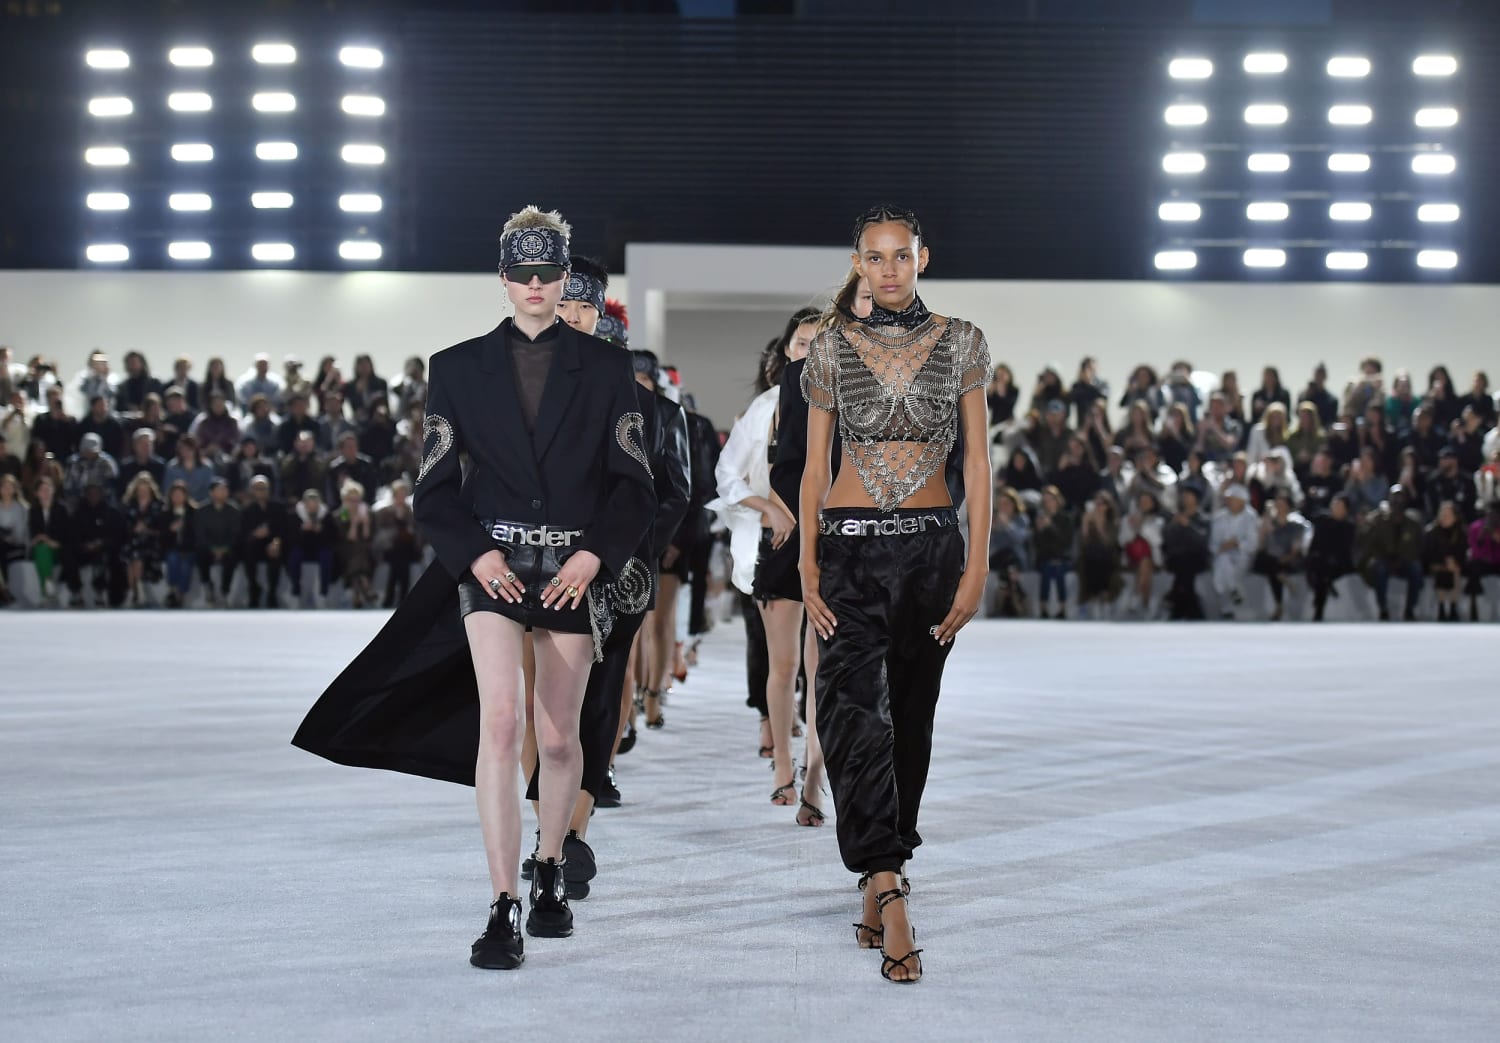 Alexander Wang based his latest collection on his family's